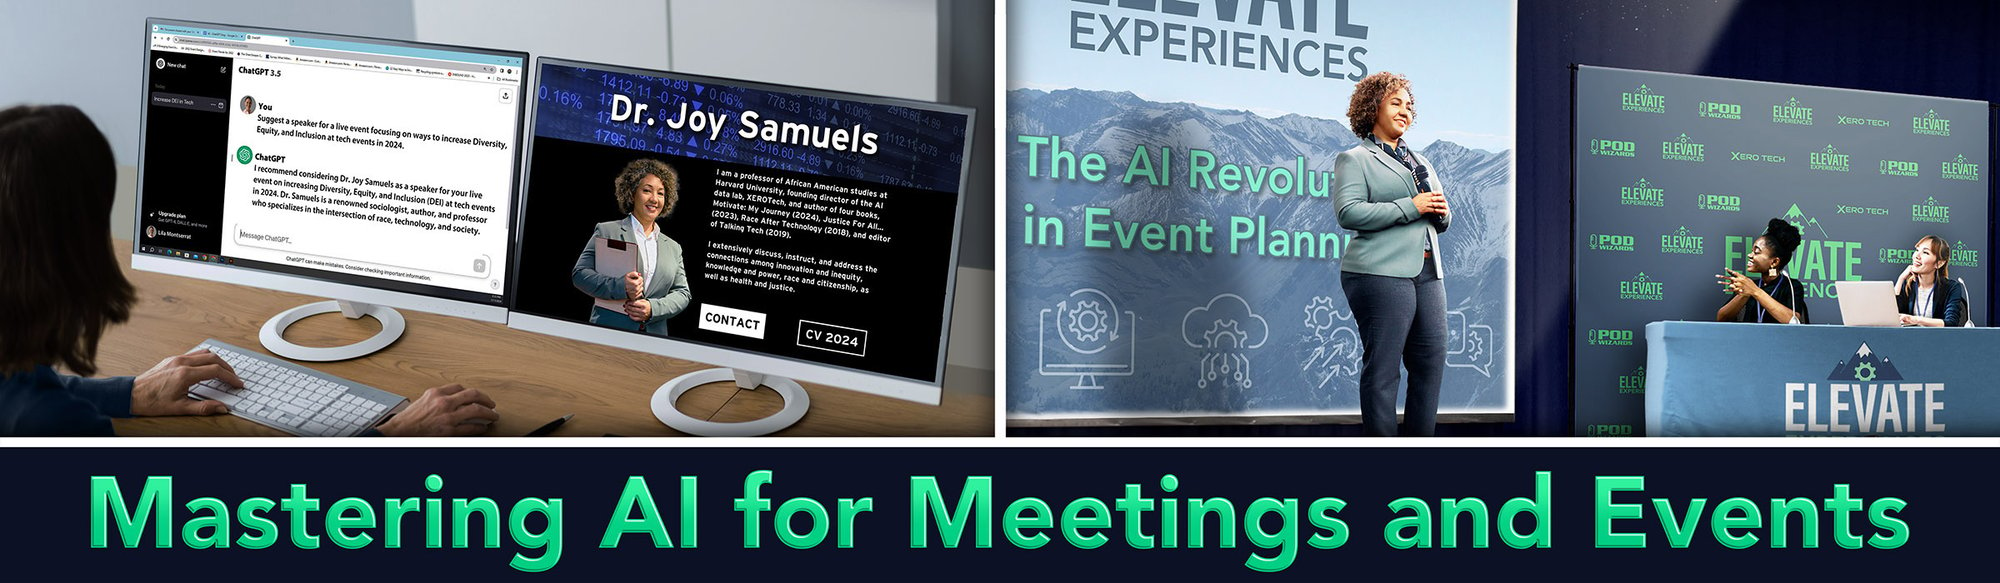 AI for Meetings and Events_Blog